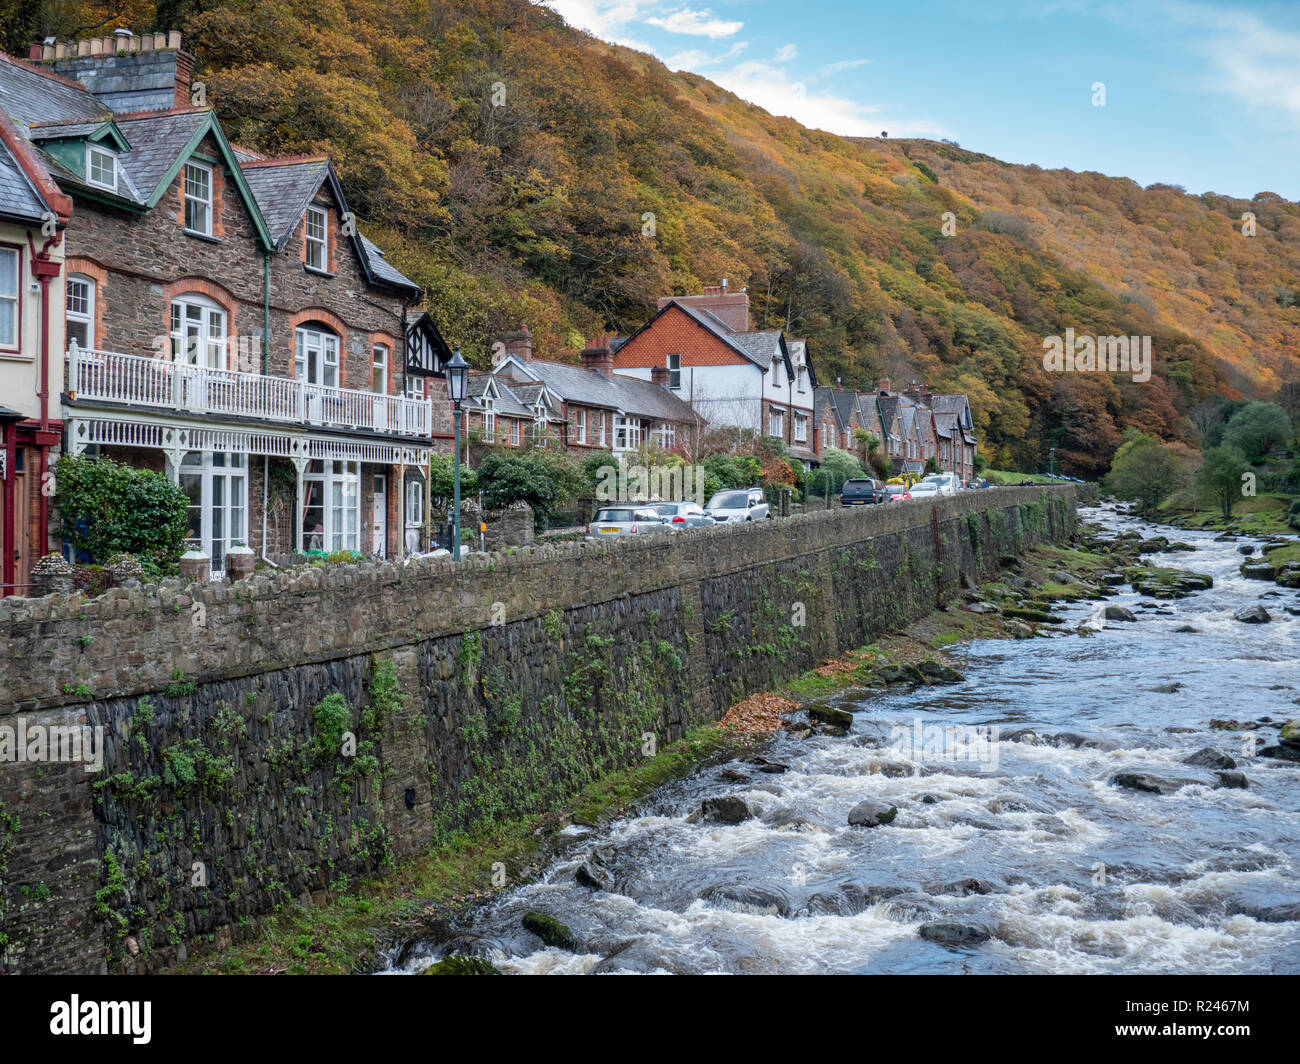 Houses and buildings on the steep valley sides at Lynmouth Devon UK in autumn Stock Photo